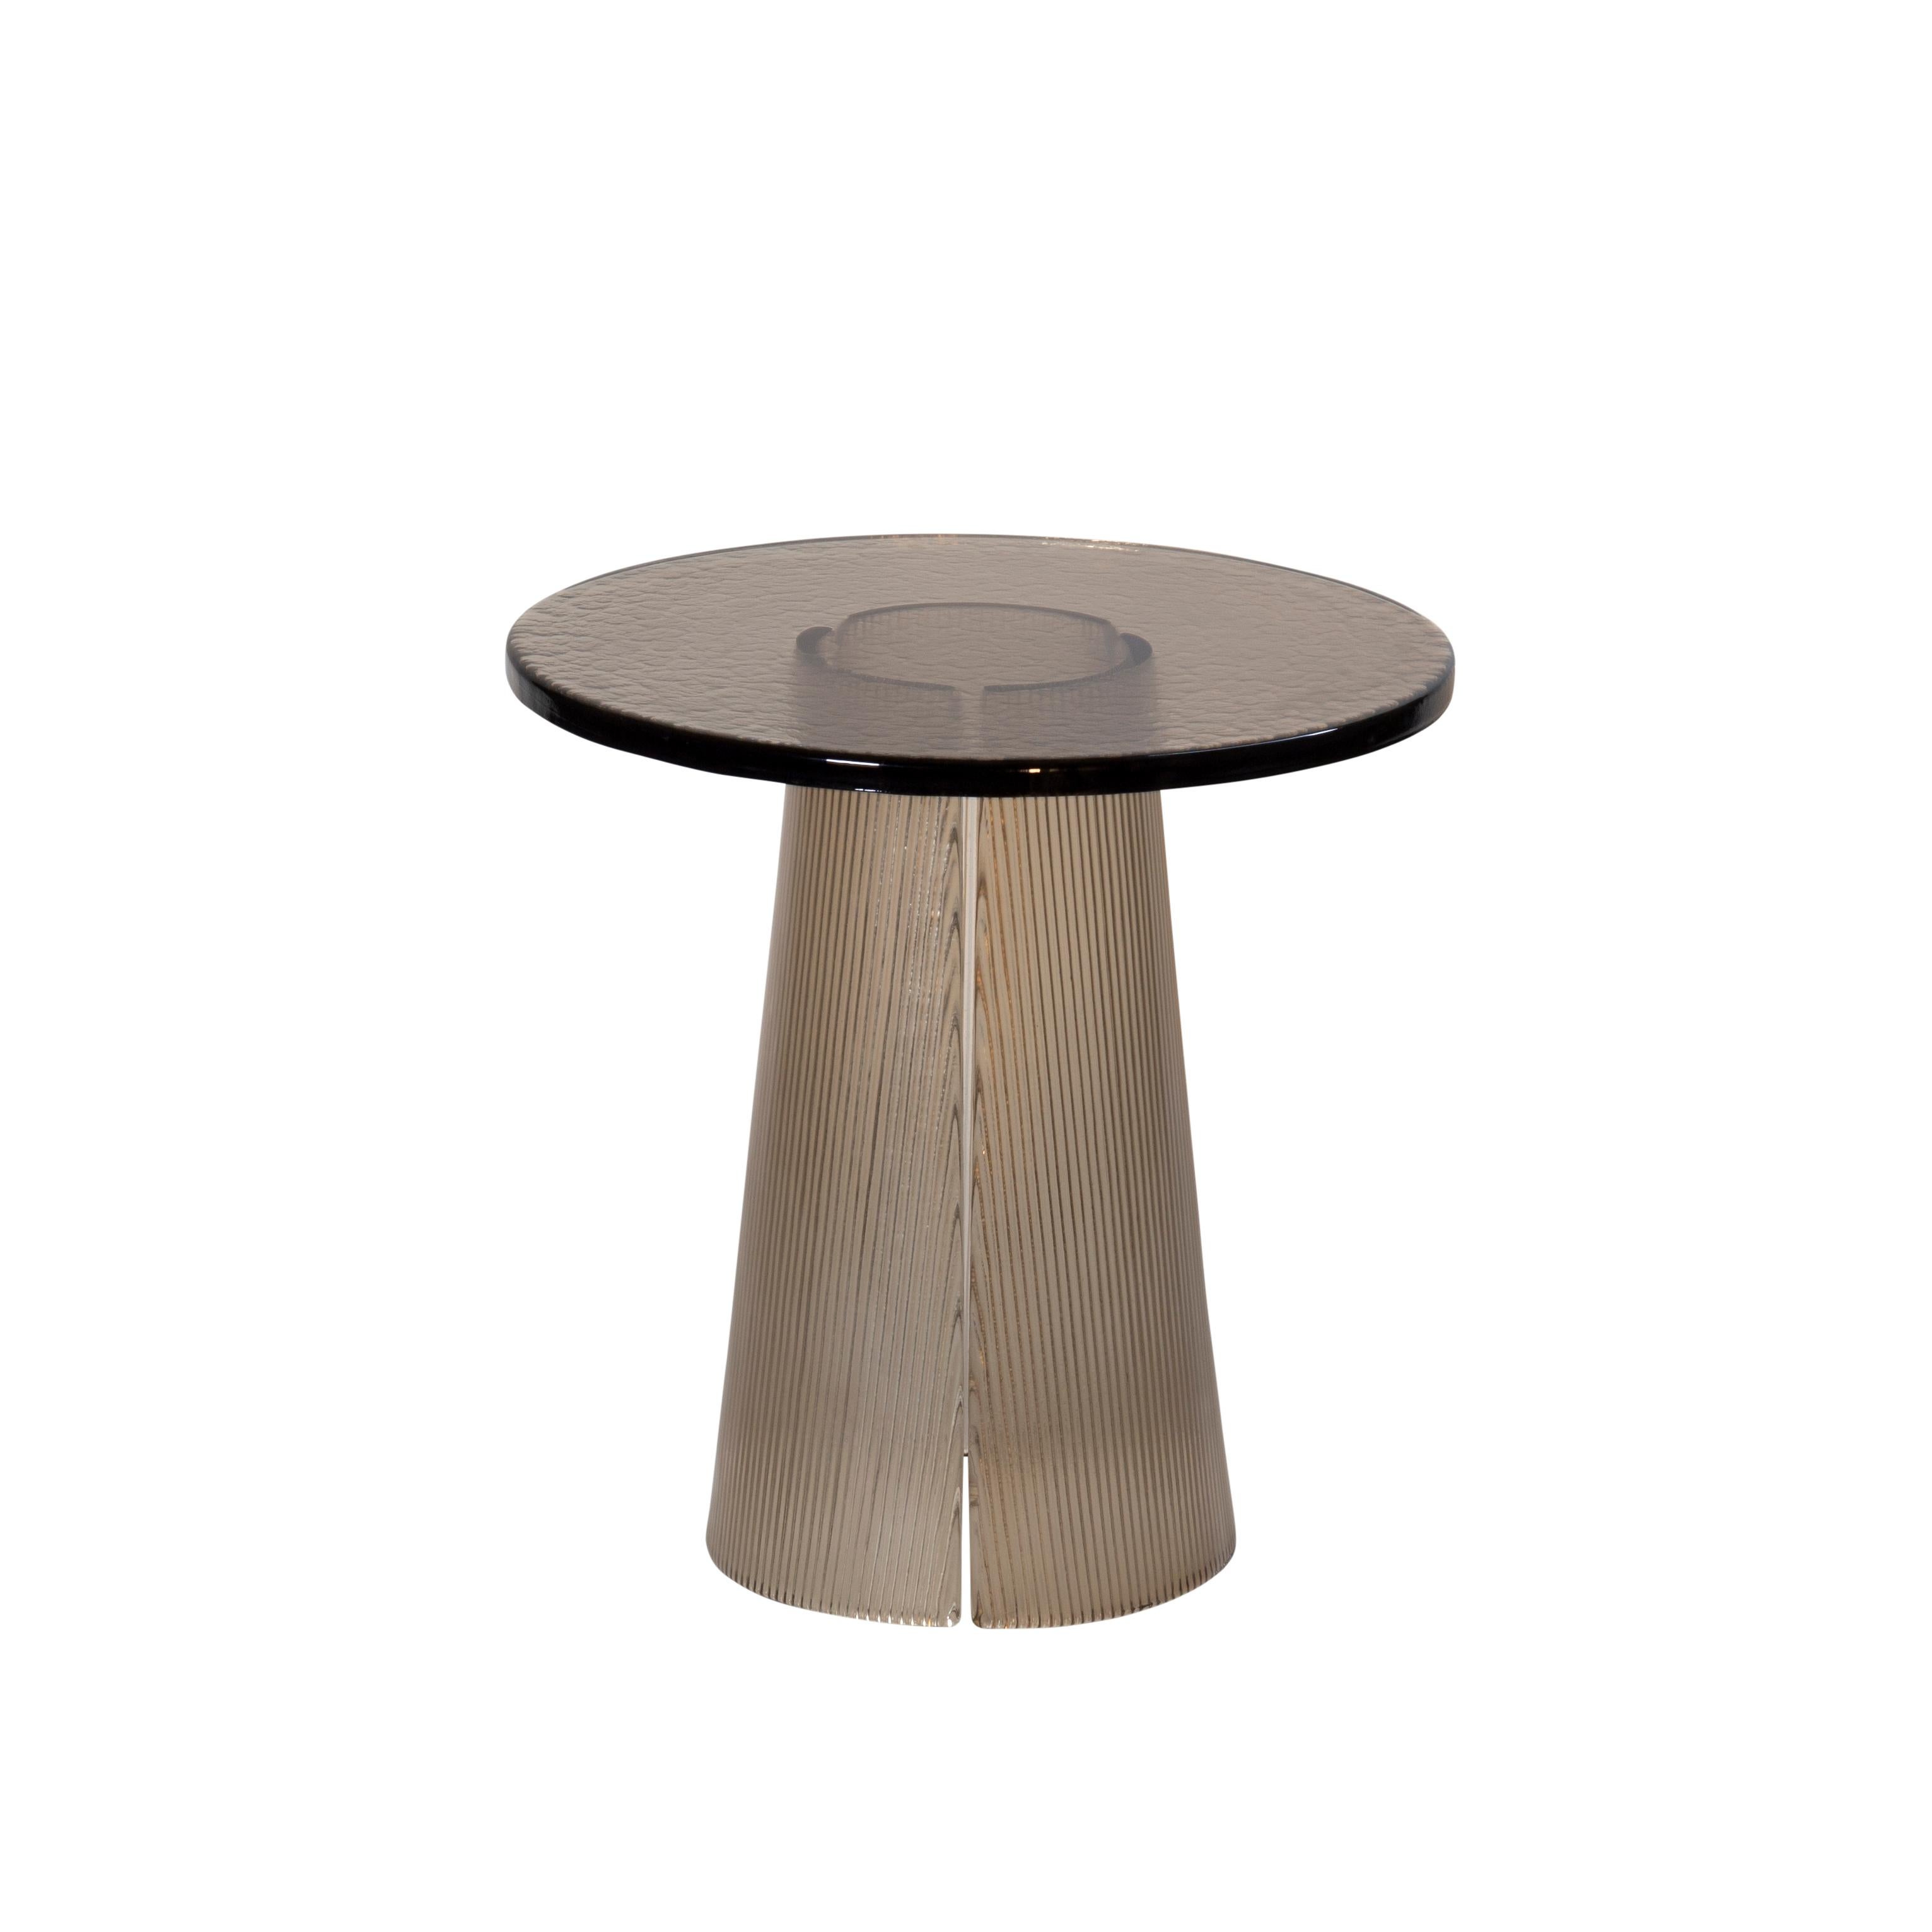 Bent side table high smoky grey by Pulpo.
Dimensions: D50 x H51.5 cm.
Materials: casted glass.

Also available in different finishes and dimensions. 

The bubbled surface of the cast glass table top dances against with the smooth lines of the